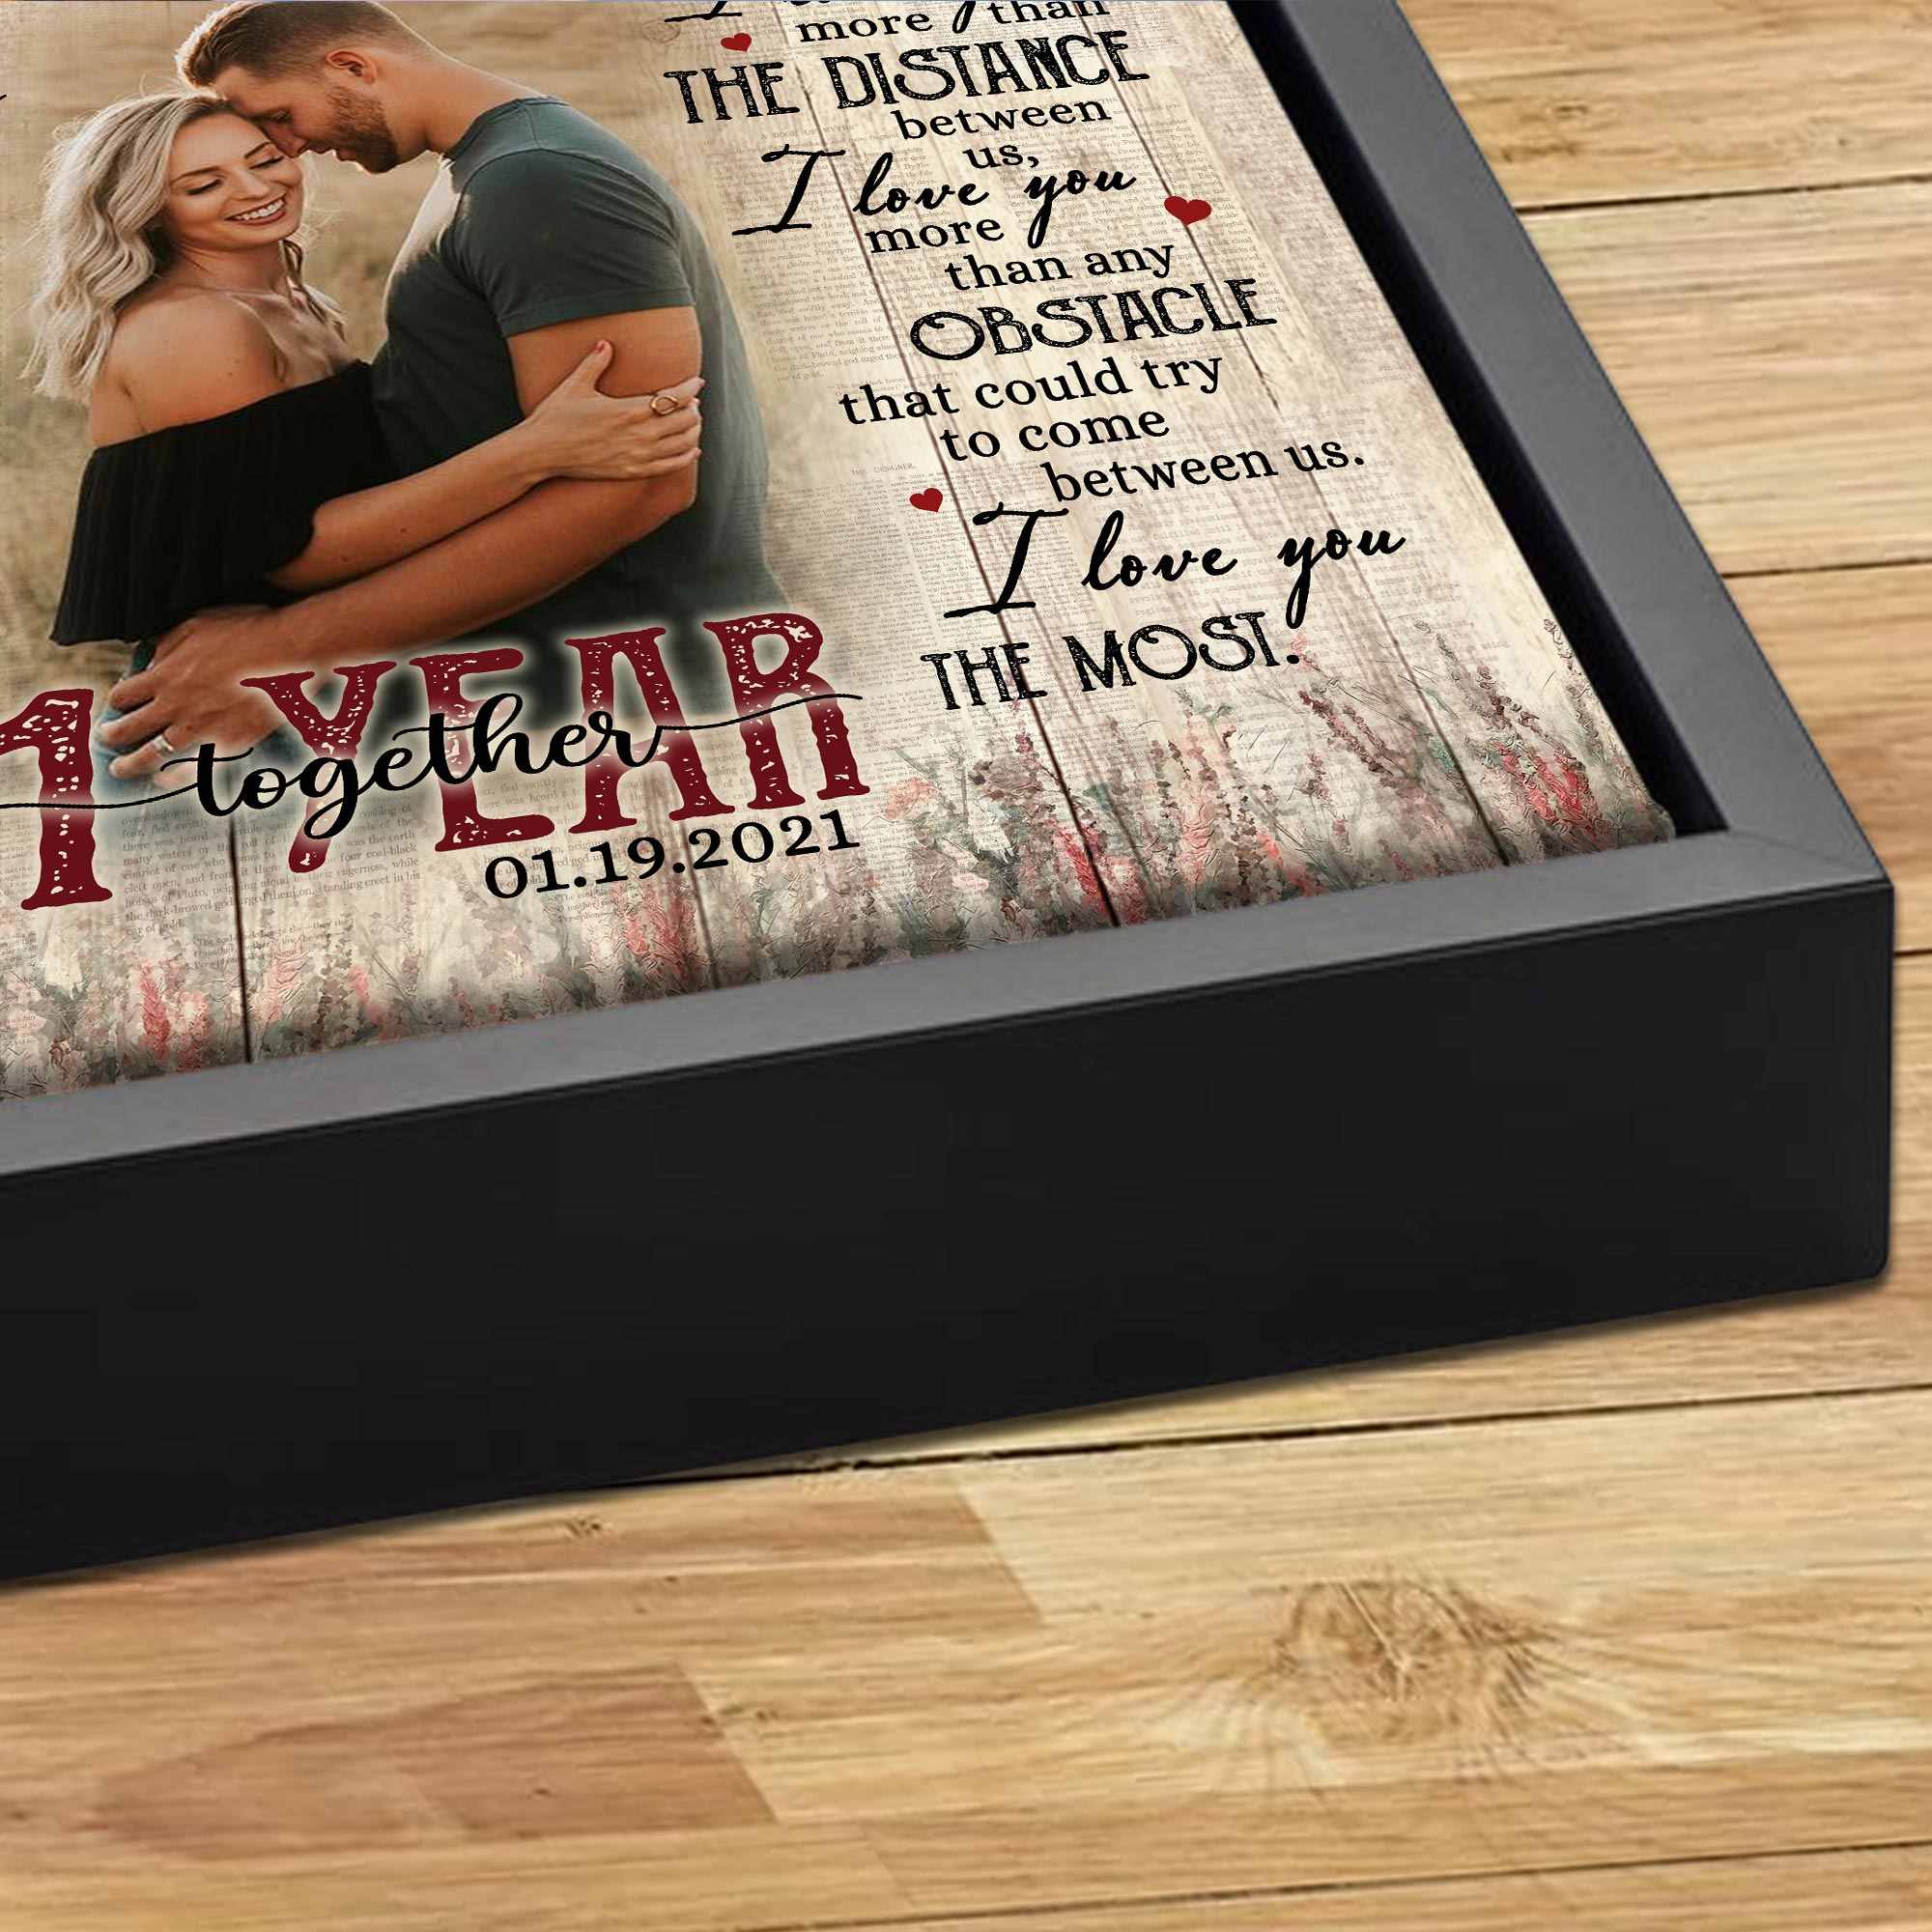 1 Year Anniversary Gifts for Him We're A Team Personalized Canvas,  Personalized Valentine Gifts For Him, Dating Anniversary Gifts for Him -  Magic Exhalation